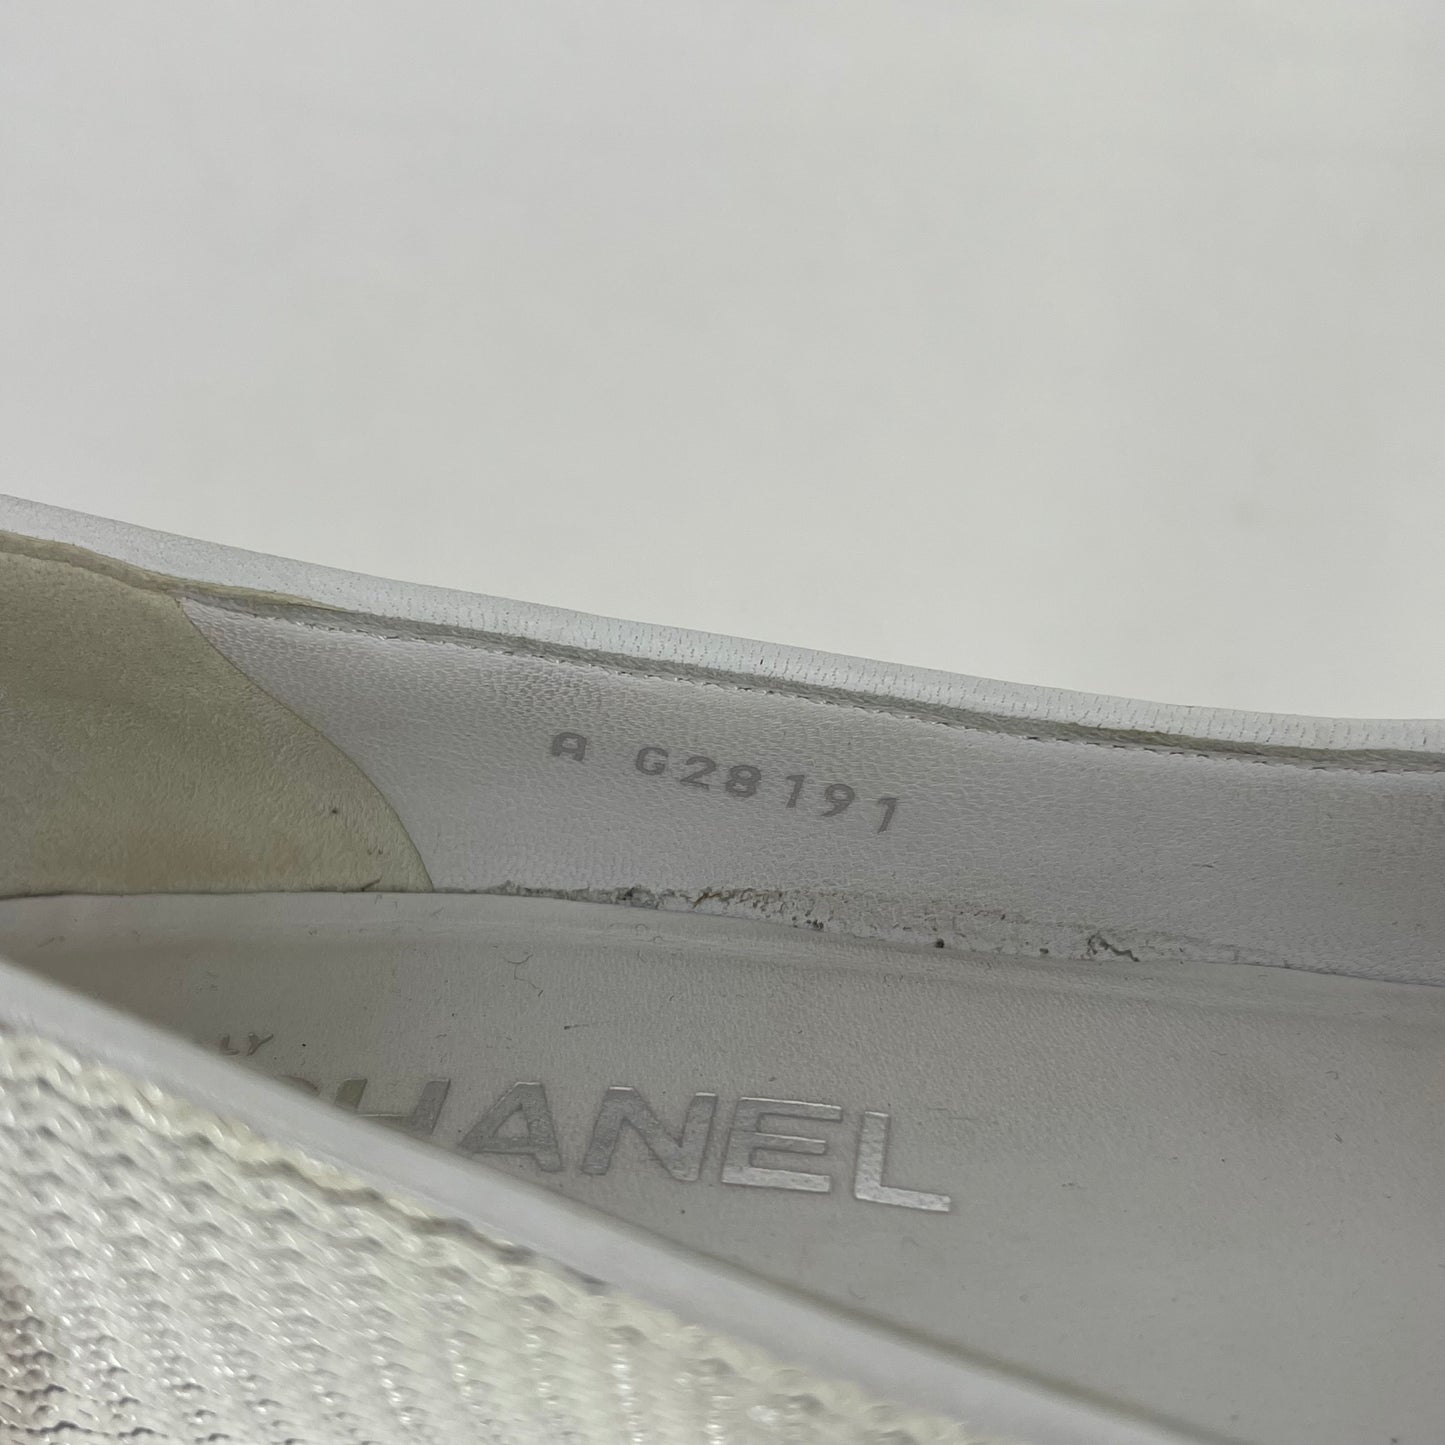 Authentic Chanel White/Black Capped Toe Flats